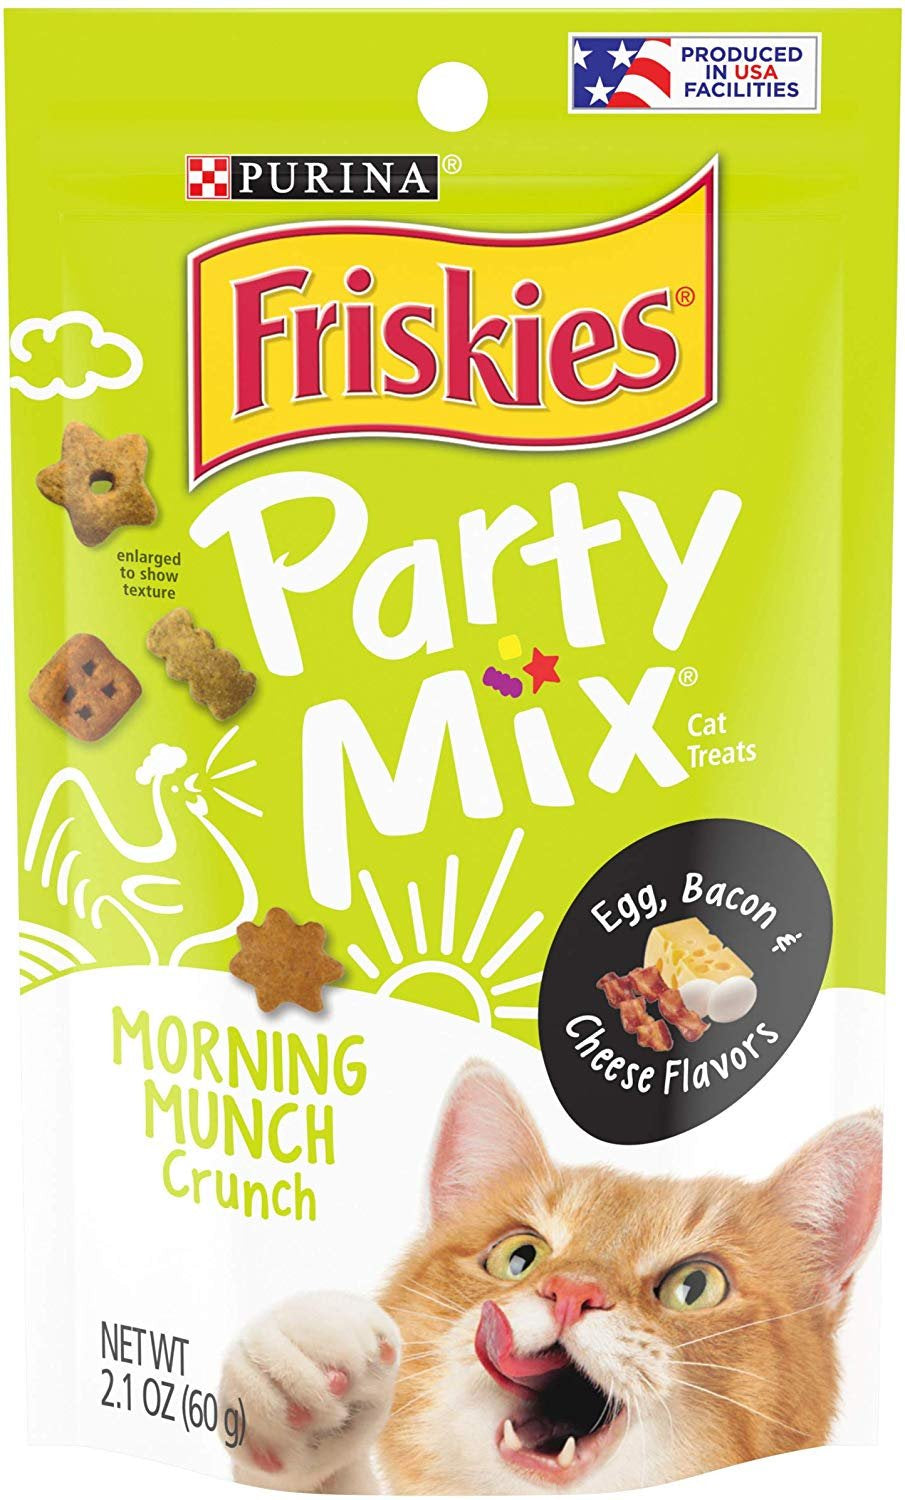 Purina Friskies Made in USA Facilities Cat Treats, Party Mix Crunch Morning Munch - 10 2.1 Oz. Pouches